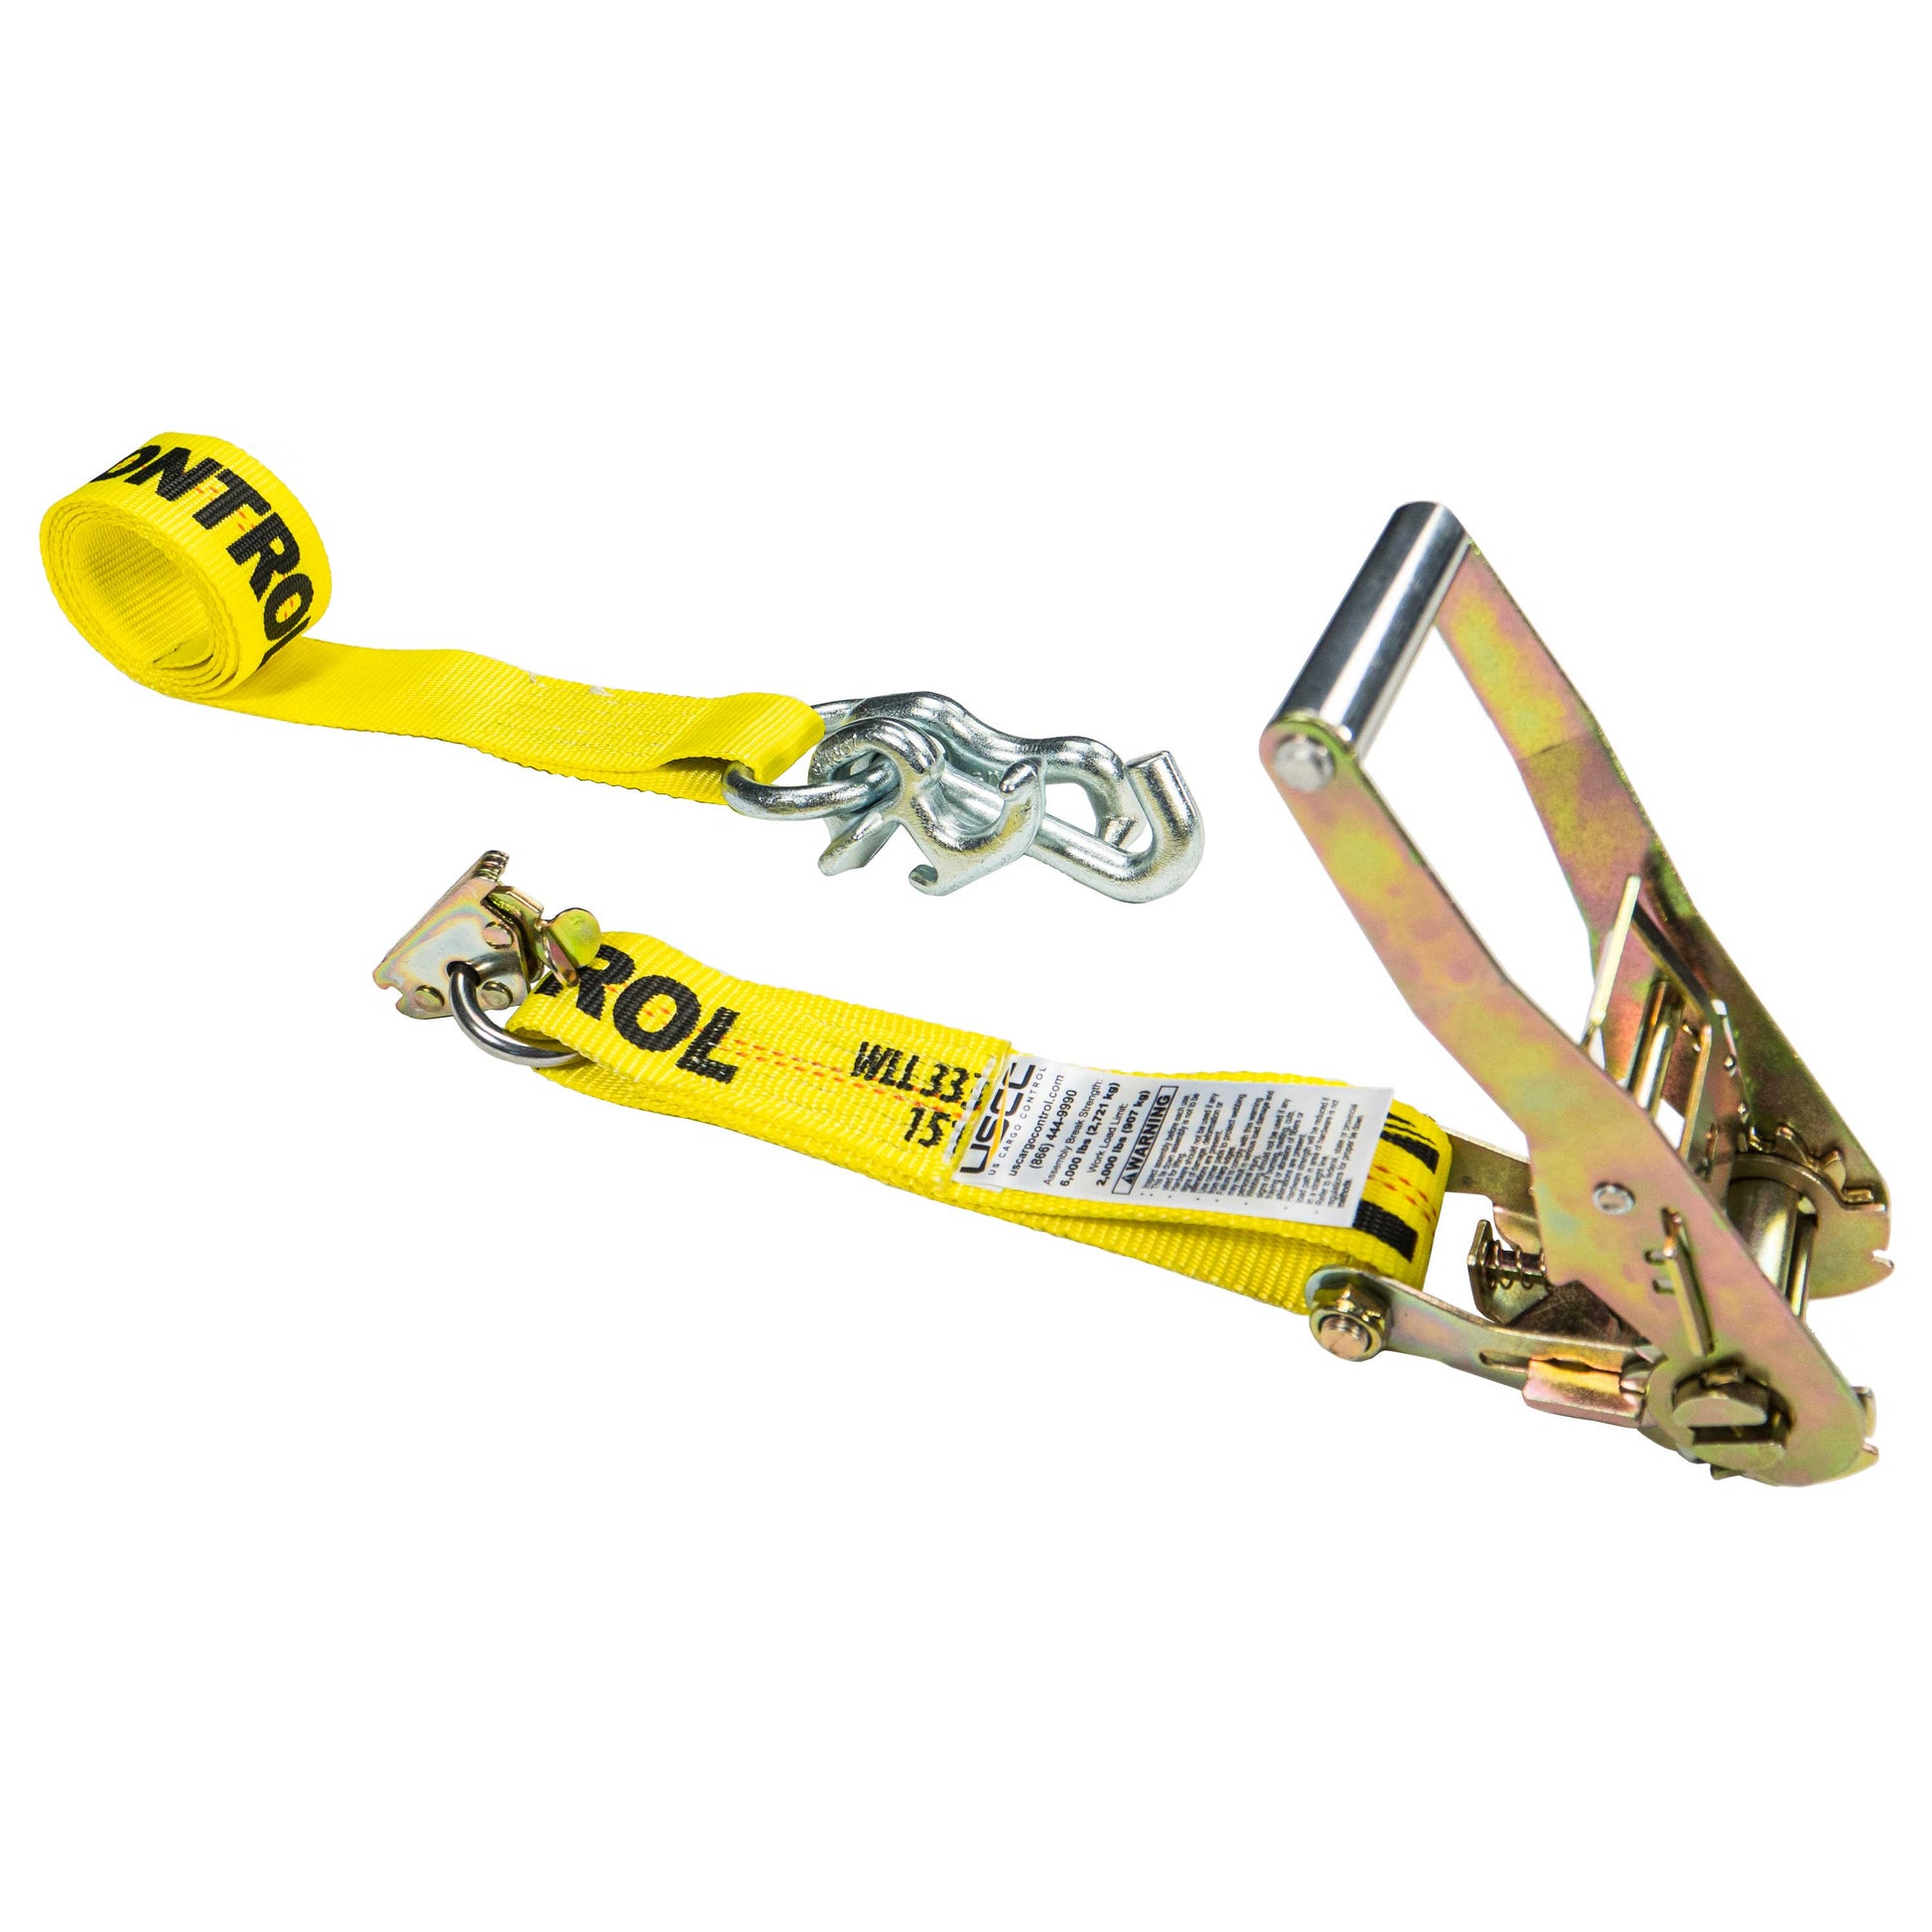 2" x 6' Ratchet Strap with E-Fitting and RTJ Cluster Hook